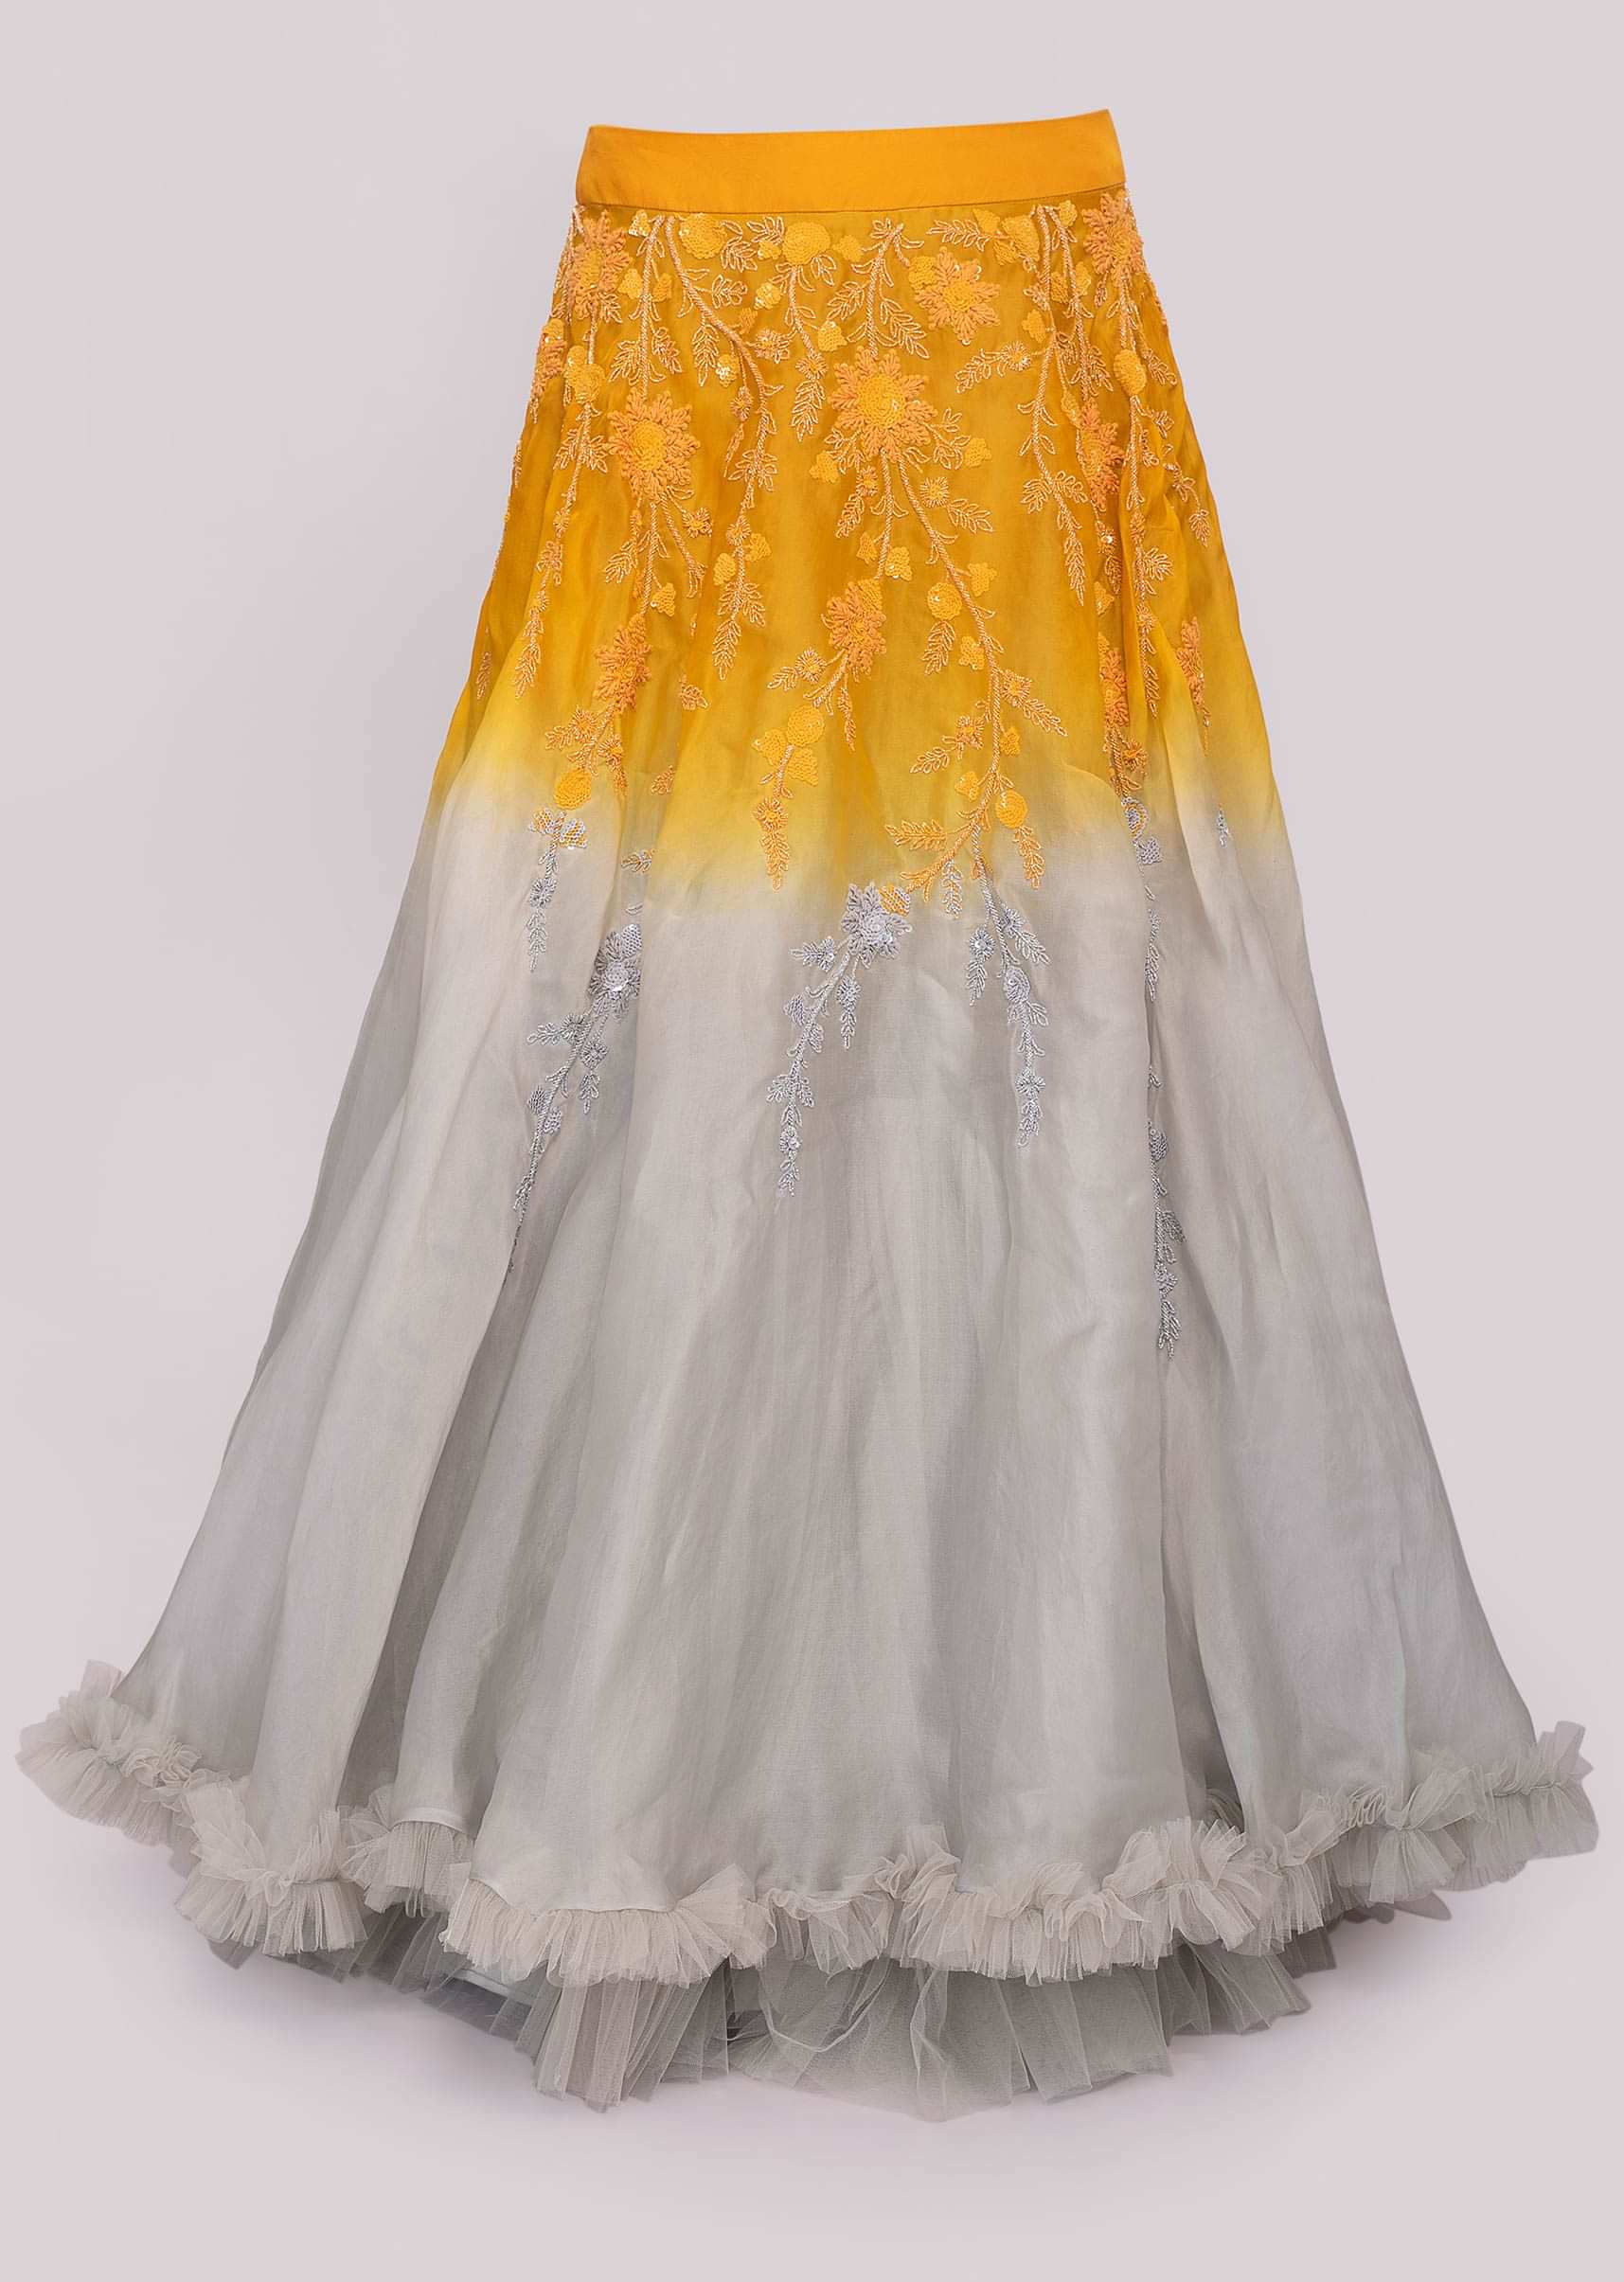 Mustard and grey  shades lehenga paired with strapless blouse and  frilled dupatta